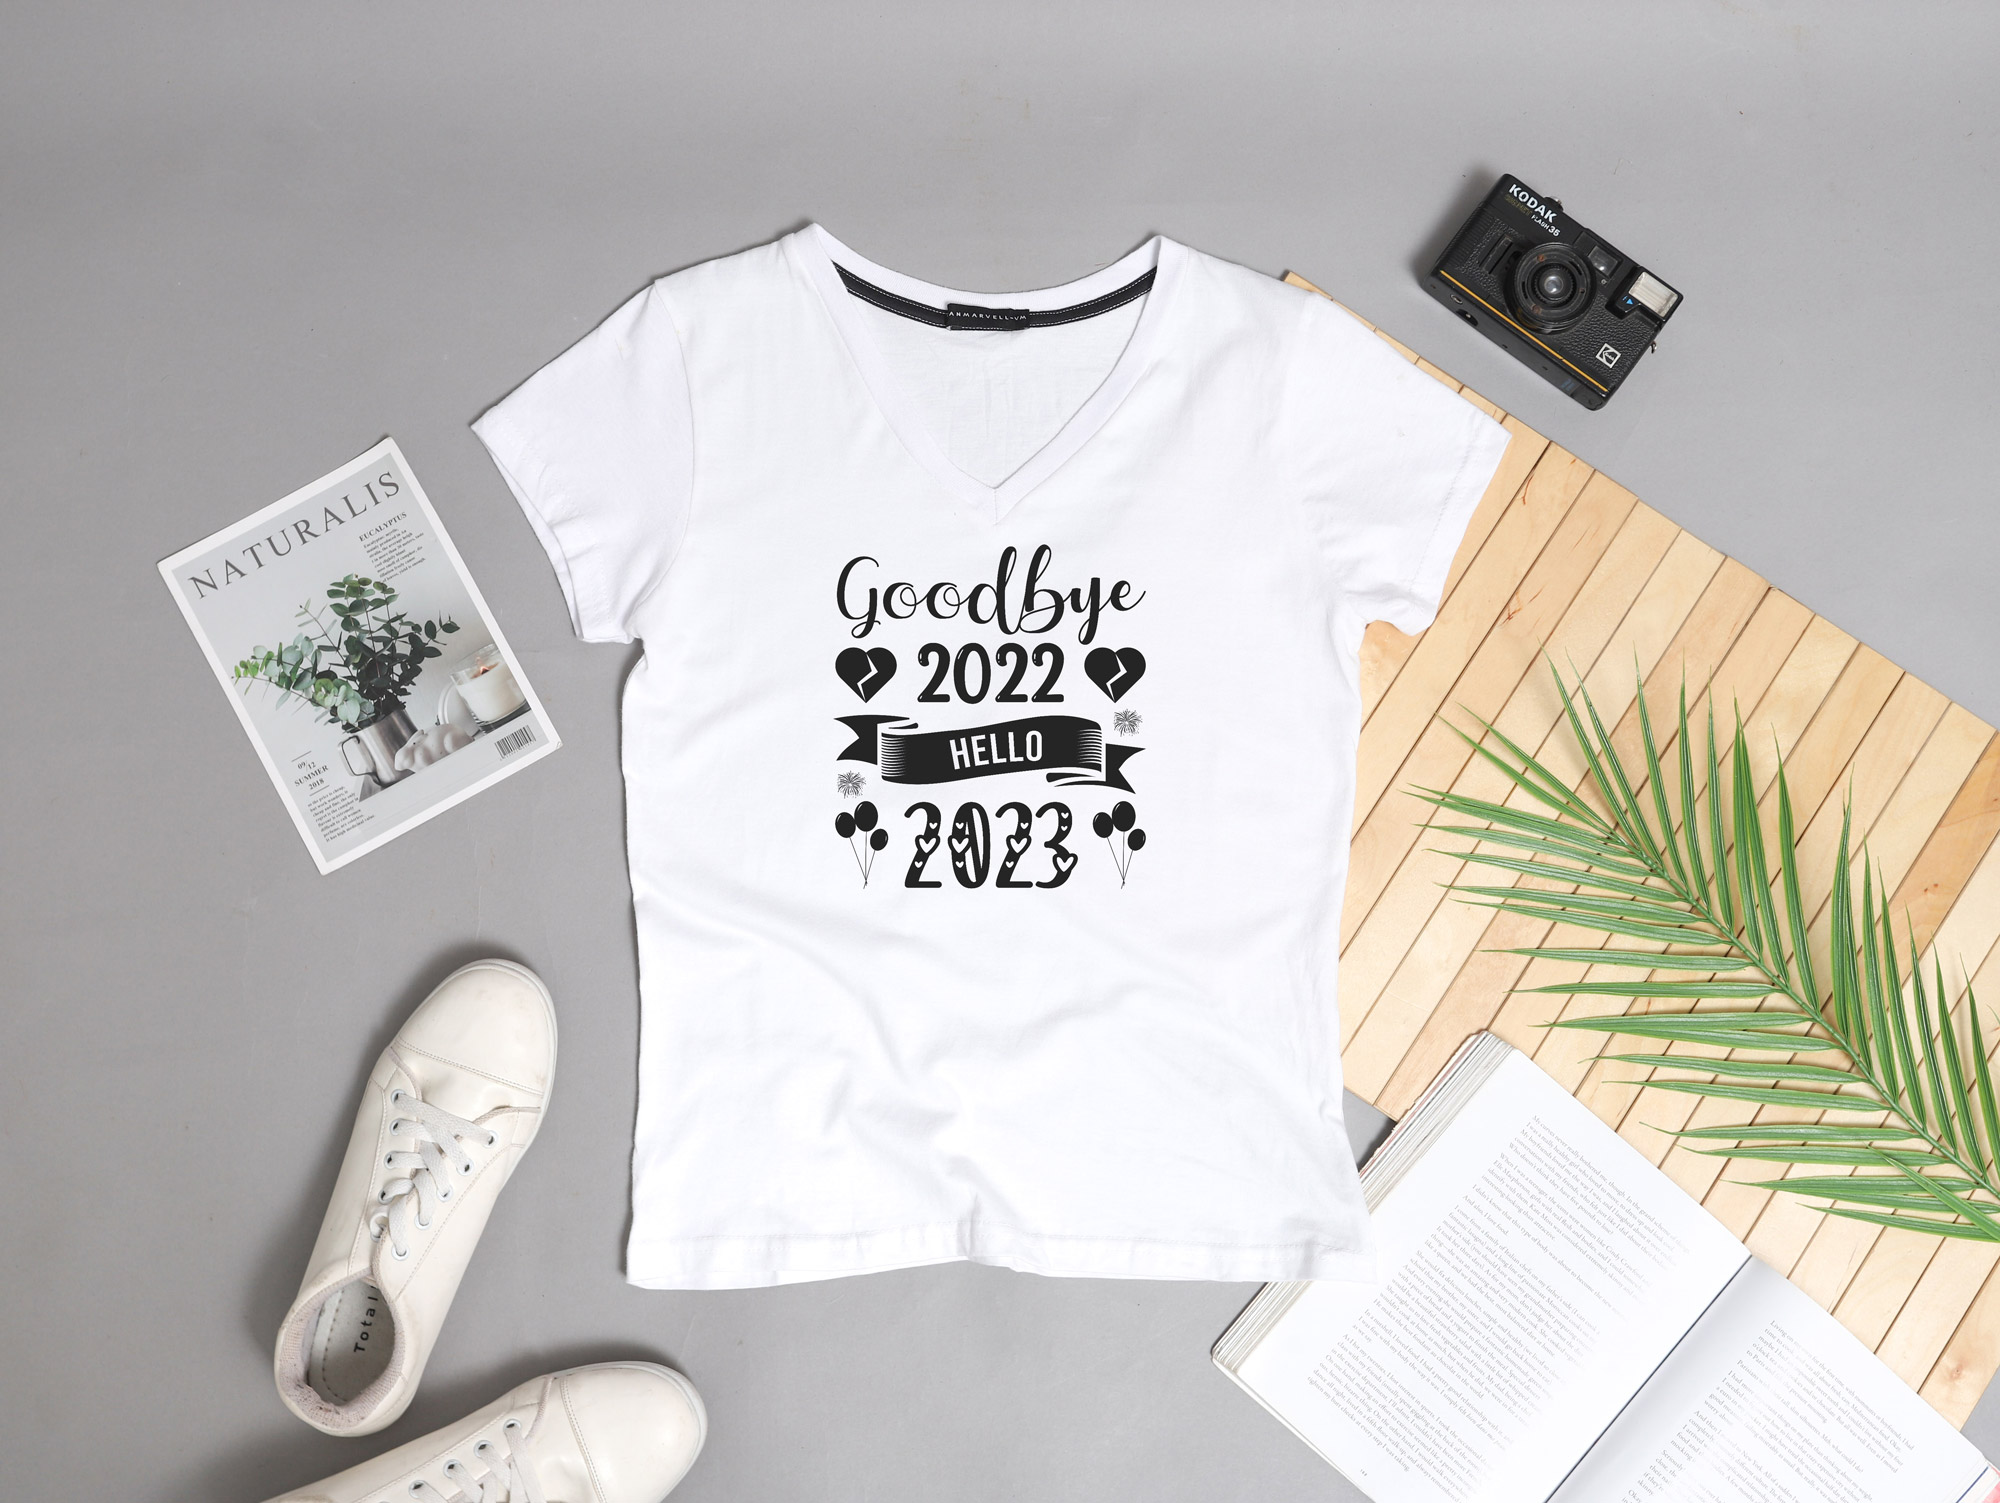 Image of a white t-shirt with a charming inscription Goodbye 2022 hello 2023